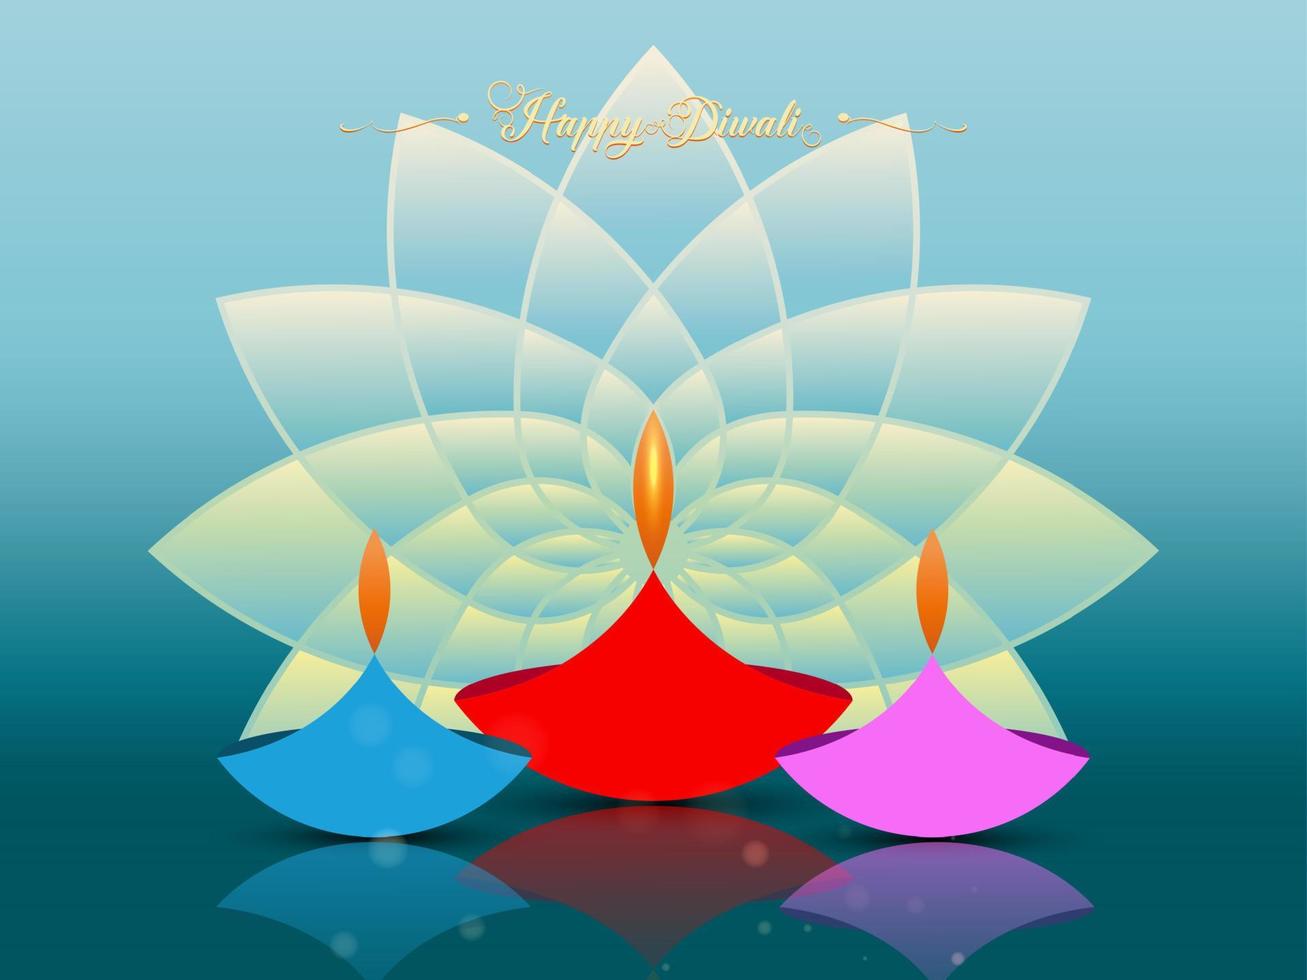 Happy Diwali Festival of Lights India Celebration colorful template. Graphic banner design of Indian Lotus Diya Oil Lamps, Modern Design in vibrant colors. Vector art style, gradient color background